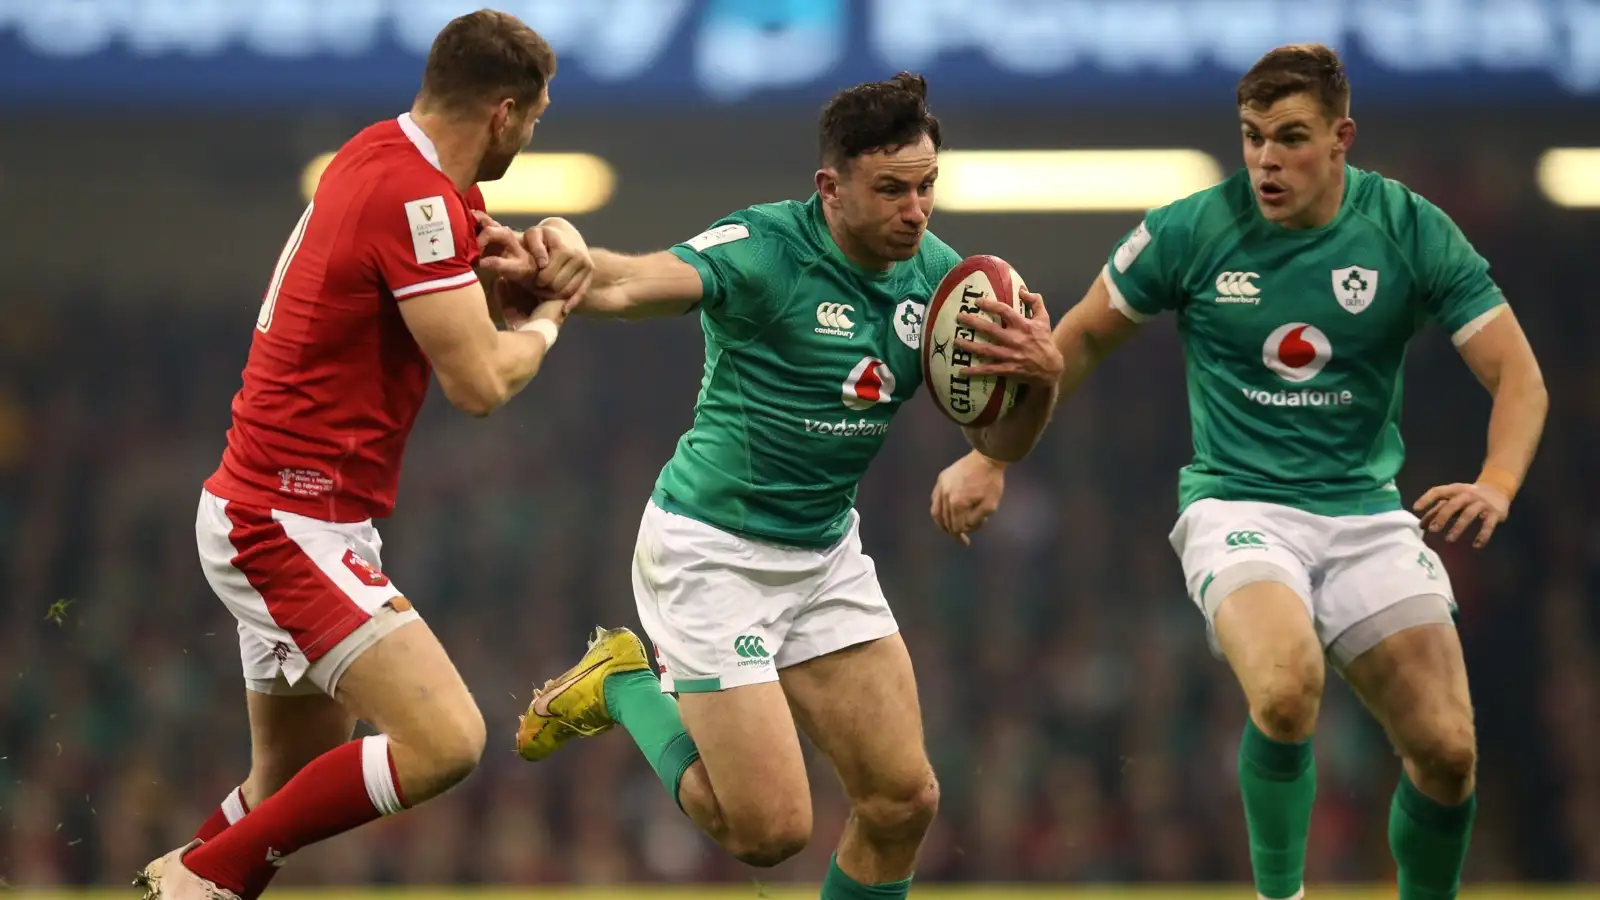 Six Nations: Ireland's Hugo Keenan with ball in hand against Wales.